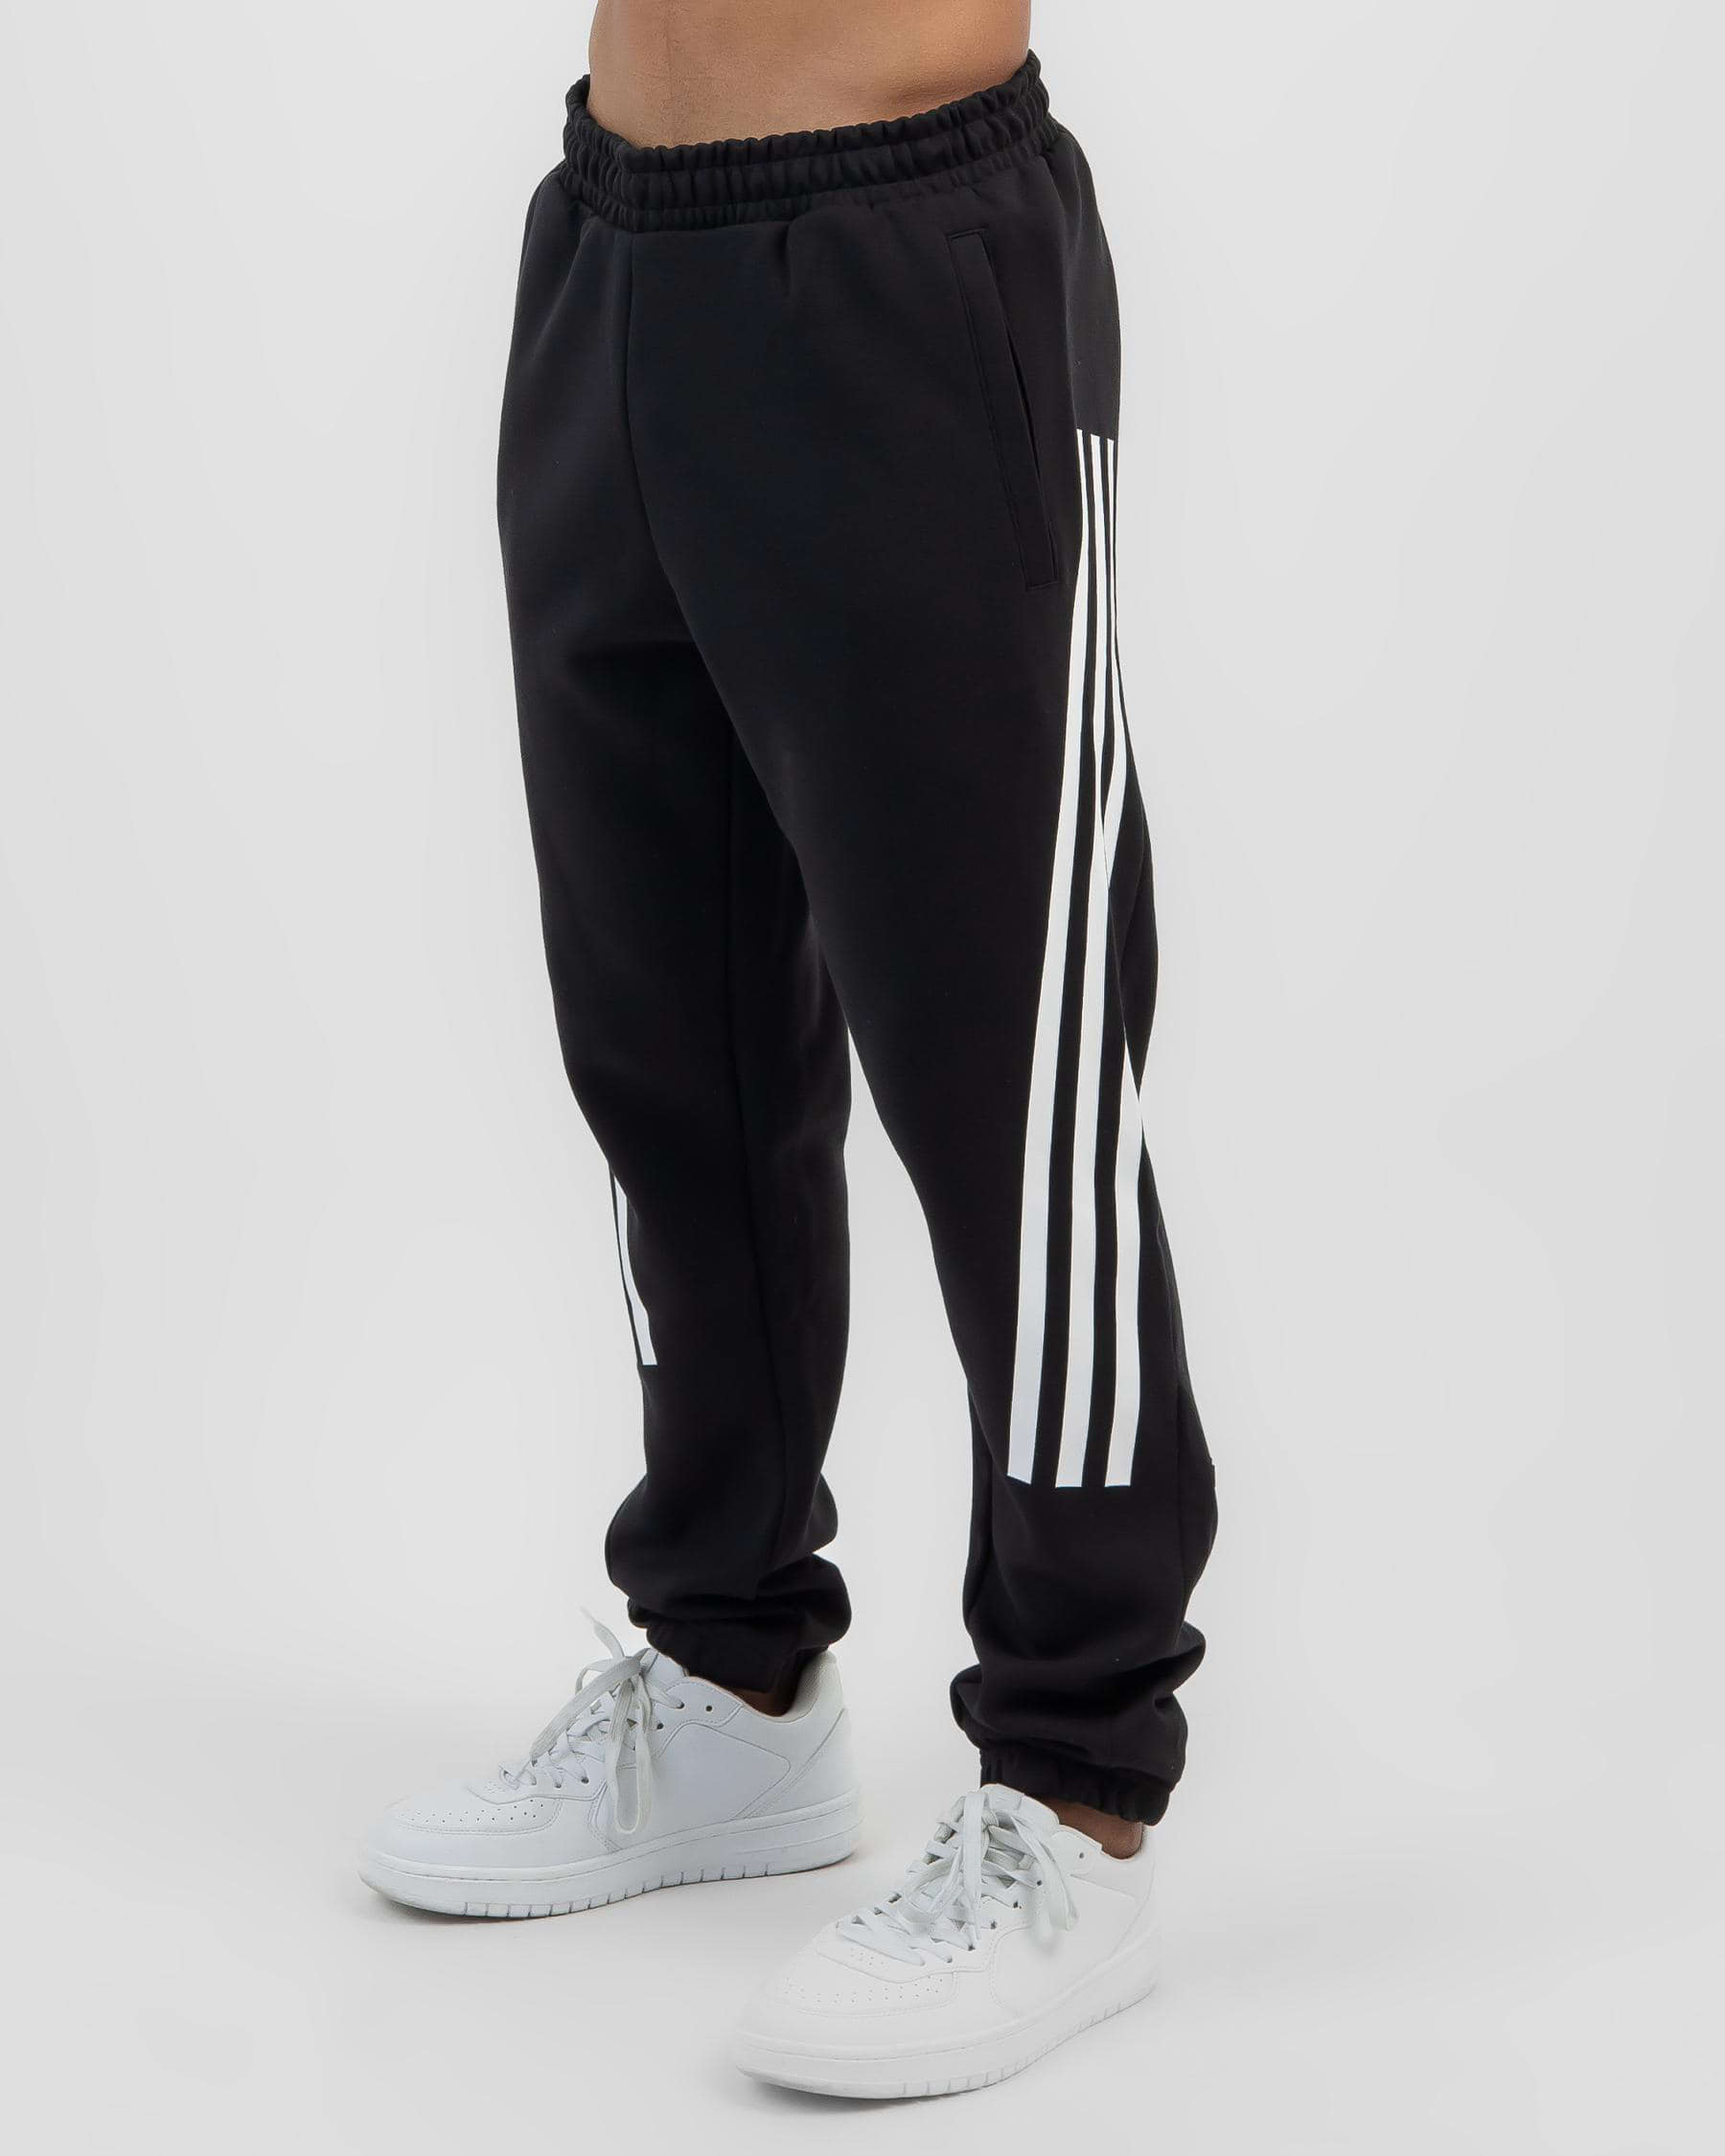 Adidas Future Icons 3 Stripe Track Pants In Black/white - Fast Shipping ...